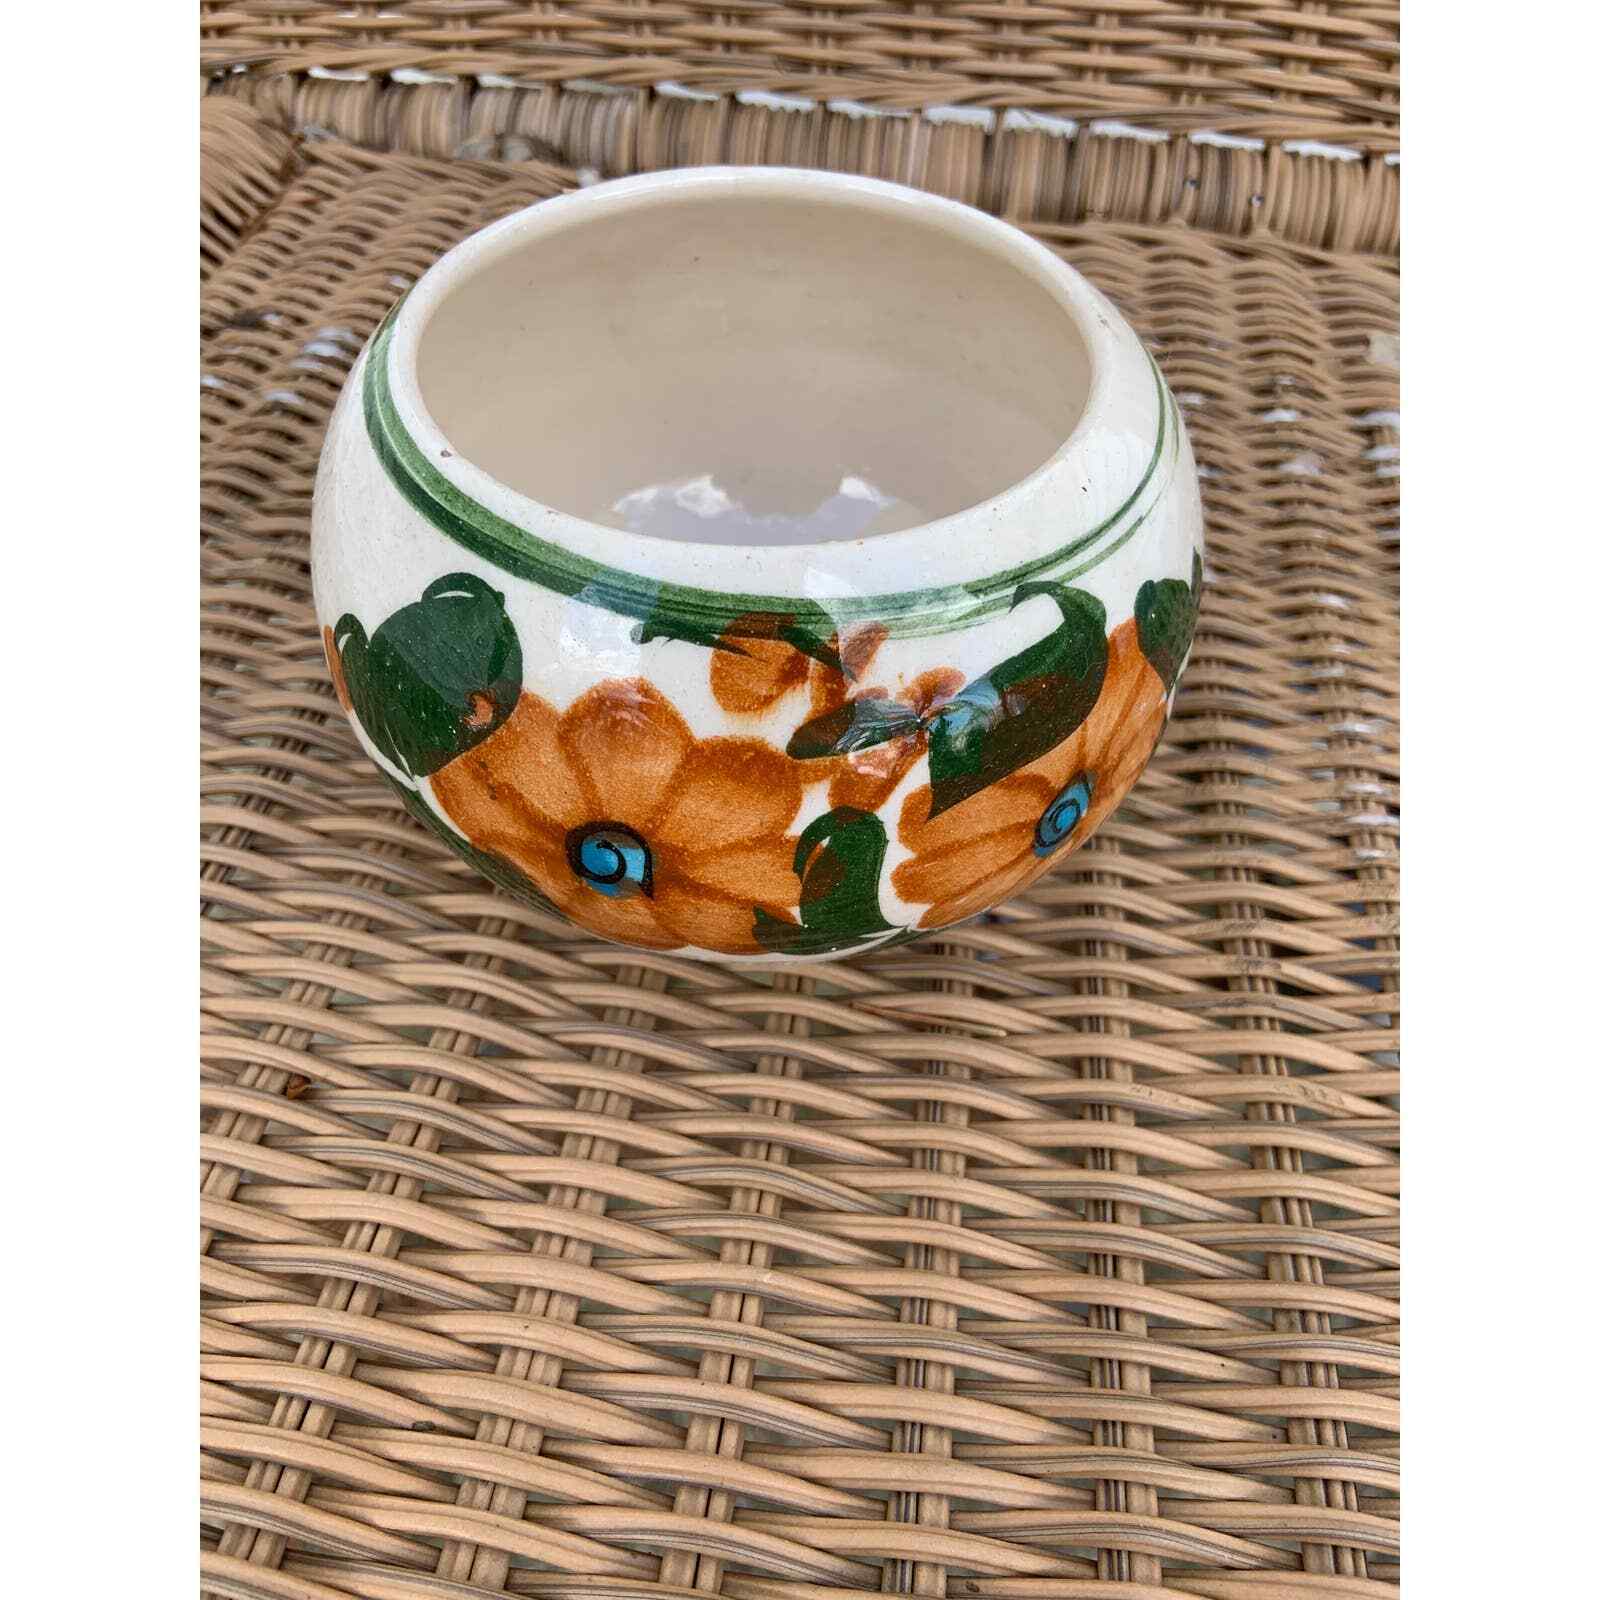 Beautiful Ceramic Pottery Flower Pot Bowl White Floral Painted Small